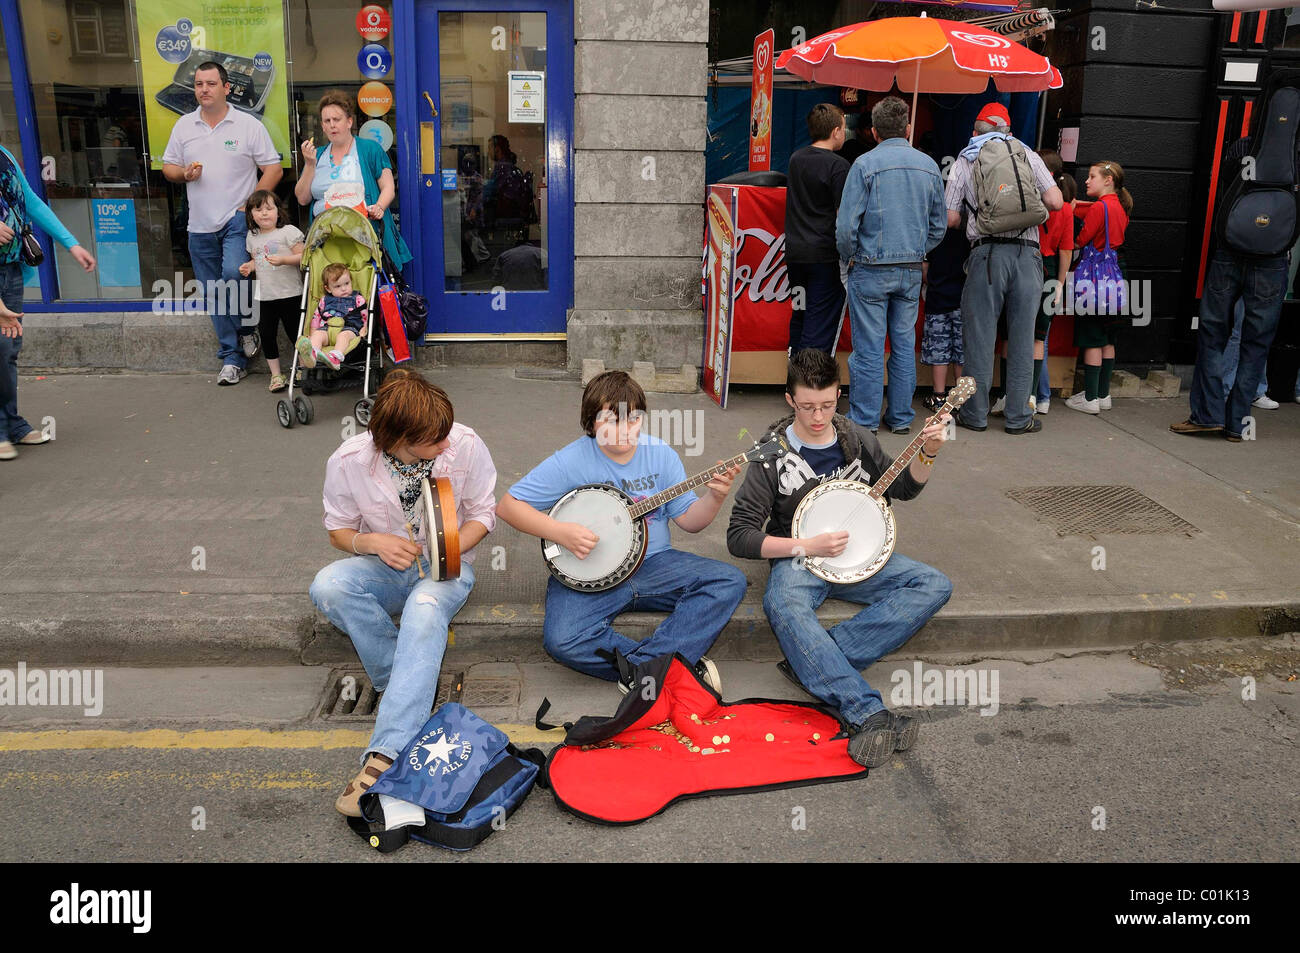 Making music with banjos at an Irish music session in the street, music festival Fleadh Cheoil na hEireann in Tullamore Stock Photo